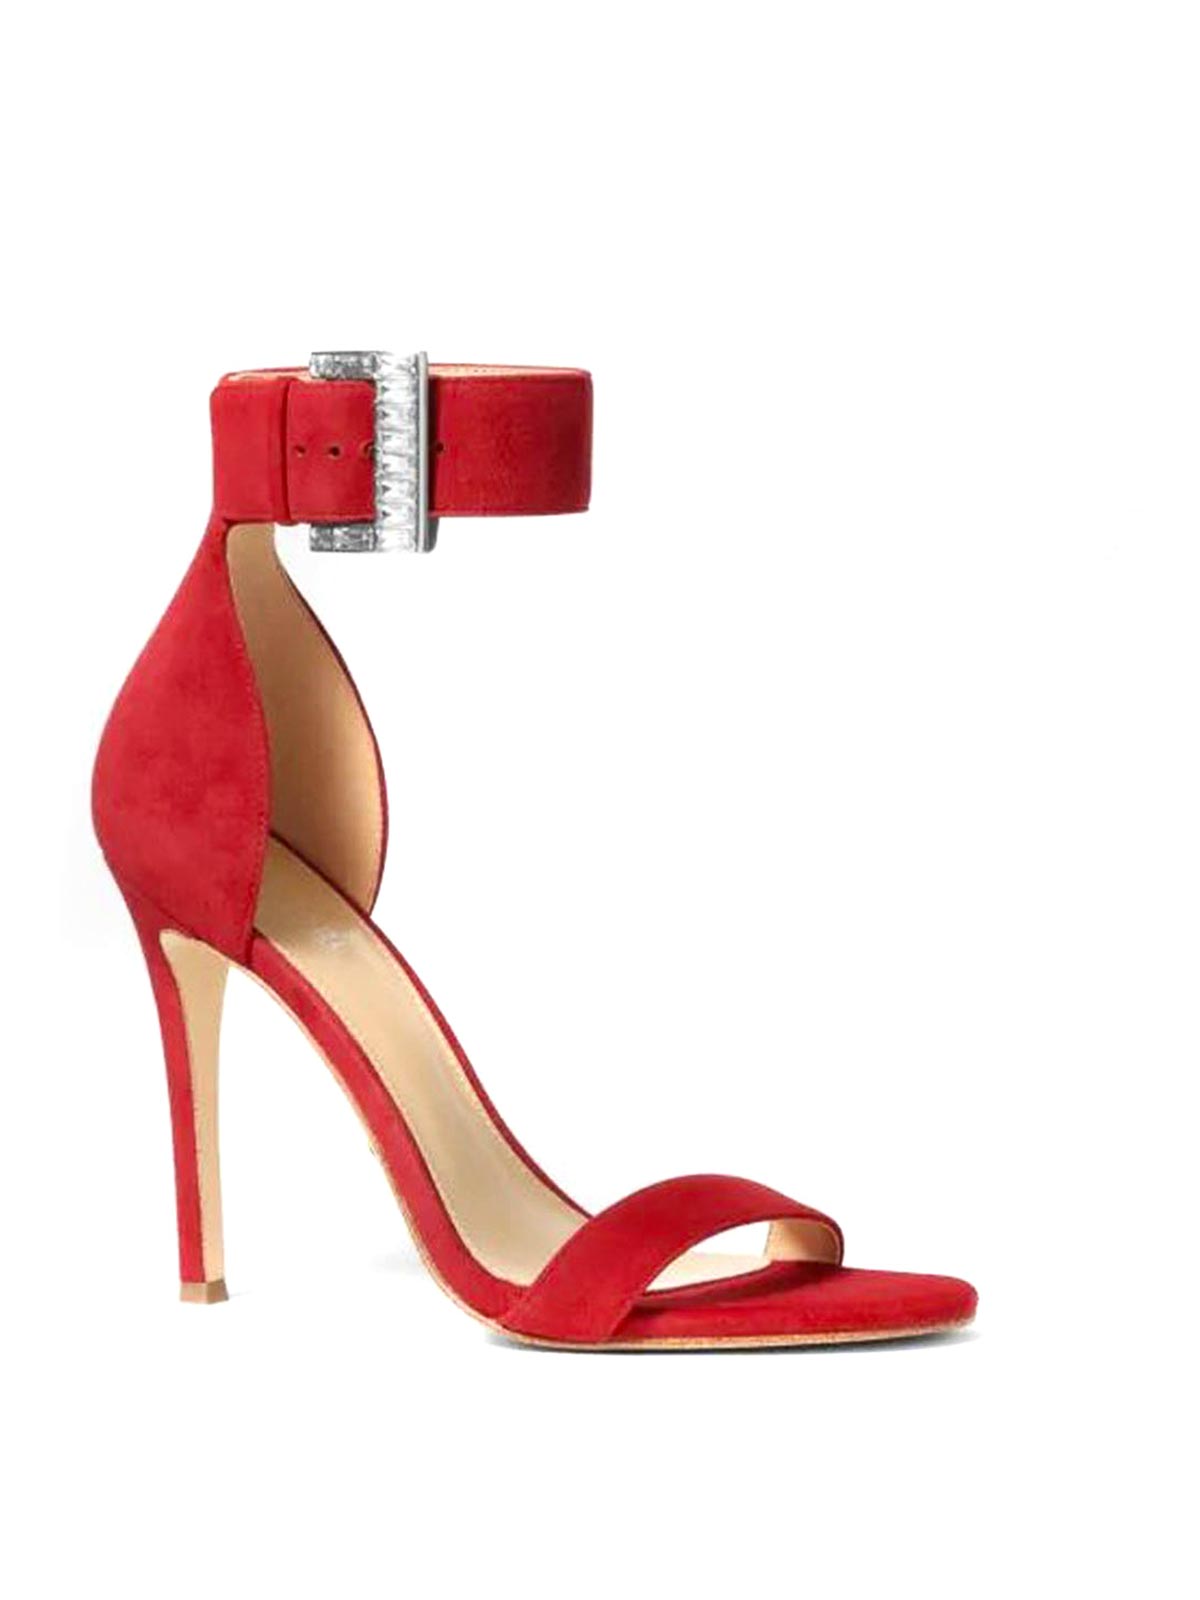 Shop Michael Kors Stiletto Sandals In Red